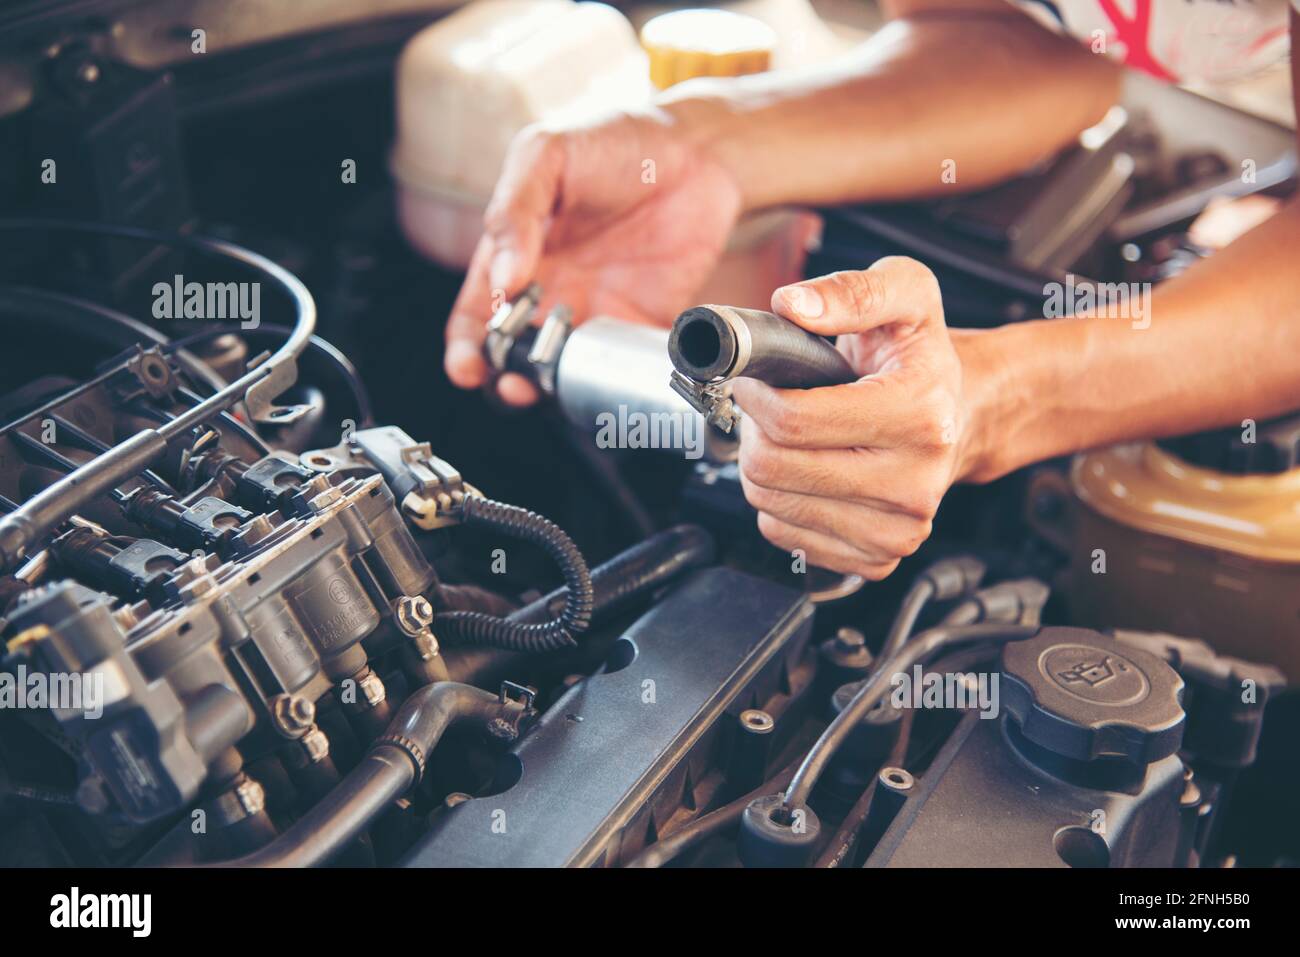 Mechanic Car Service in automobile garage auto car and vehicles service mechanical engineering. Automobile mechanic hands car repairs automotive works Stock Photo